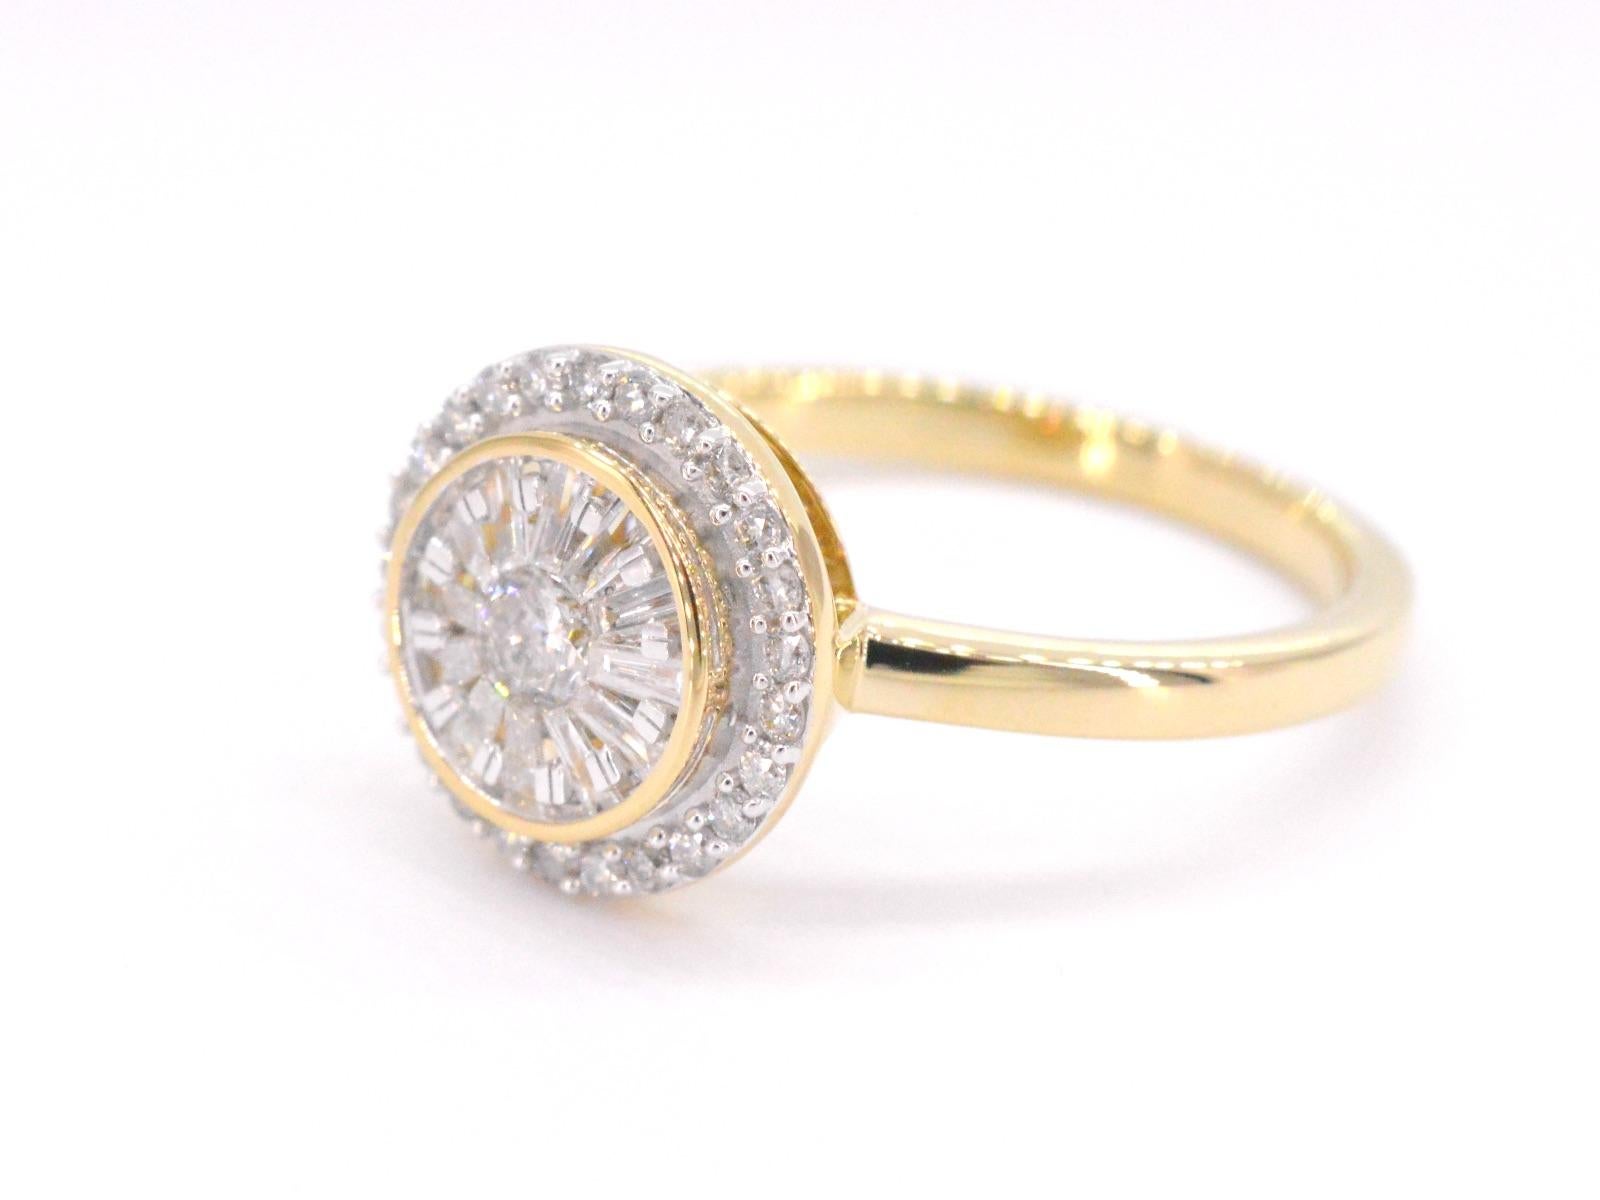 A yellow gold ring with brilliant and baguette cut diamonds in a round model is a stunning piece of jewelry that exudes luxury and sophistication. The brilliant and baguette cut diamonds are expertly arranged in a round model, creating a striking